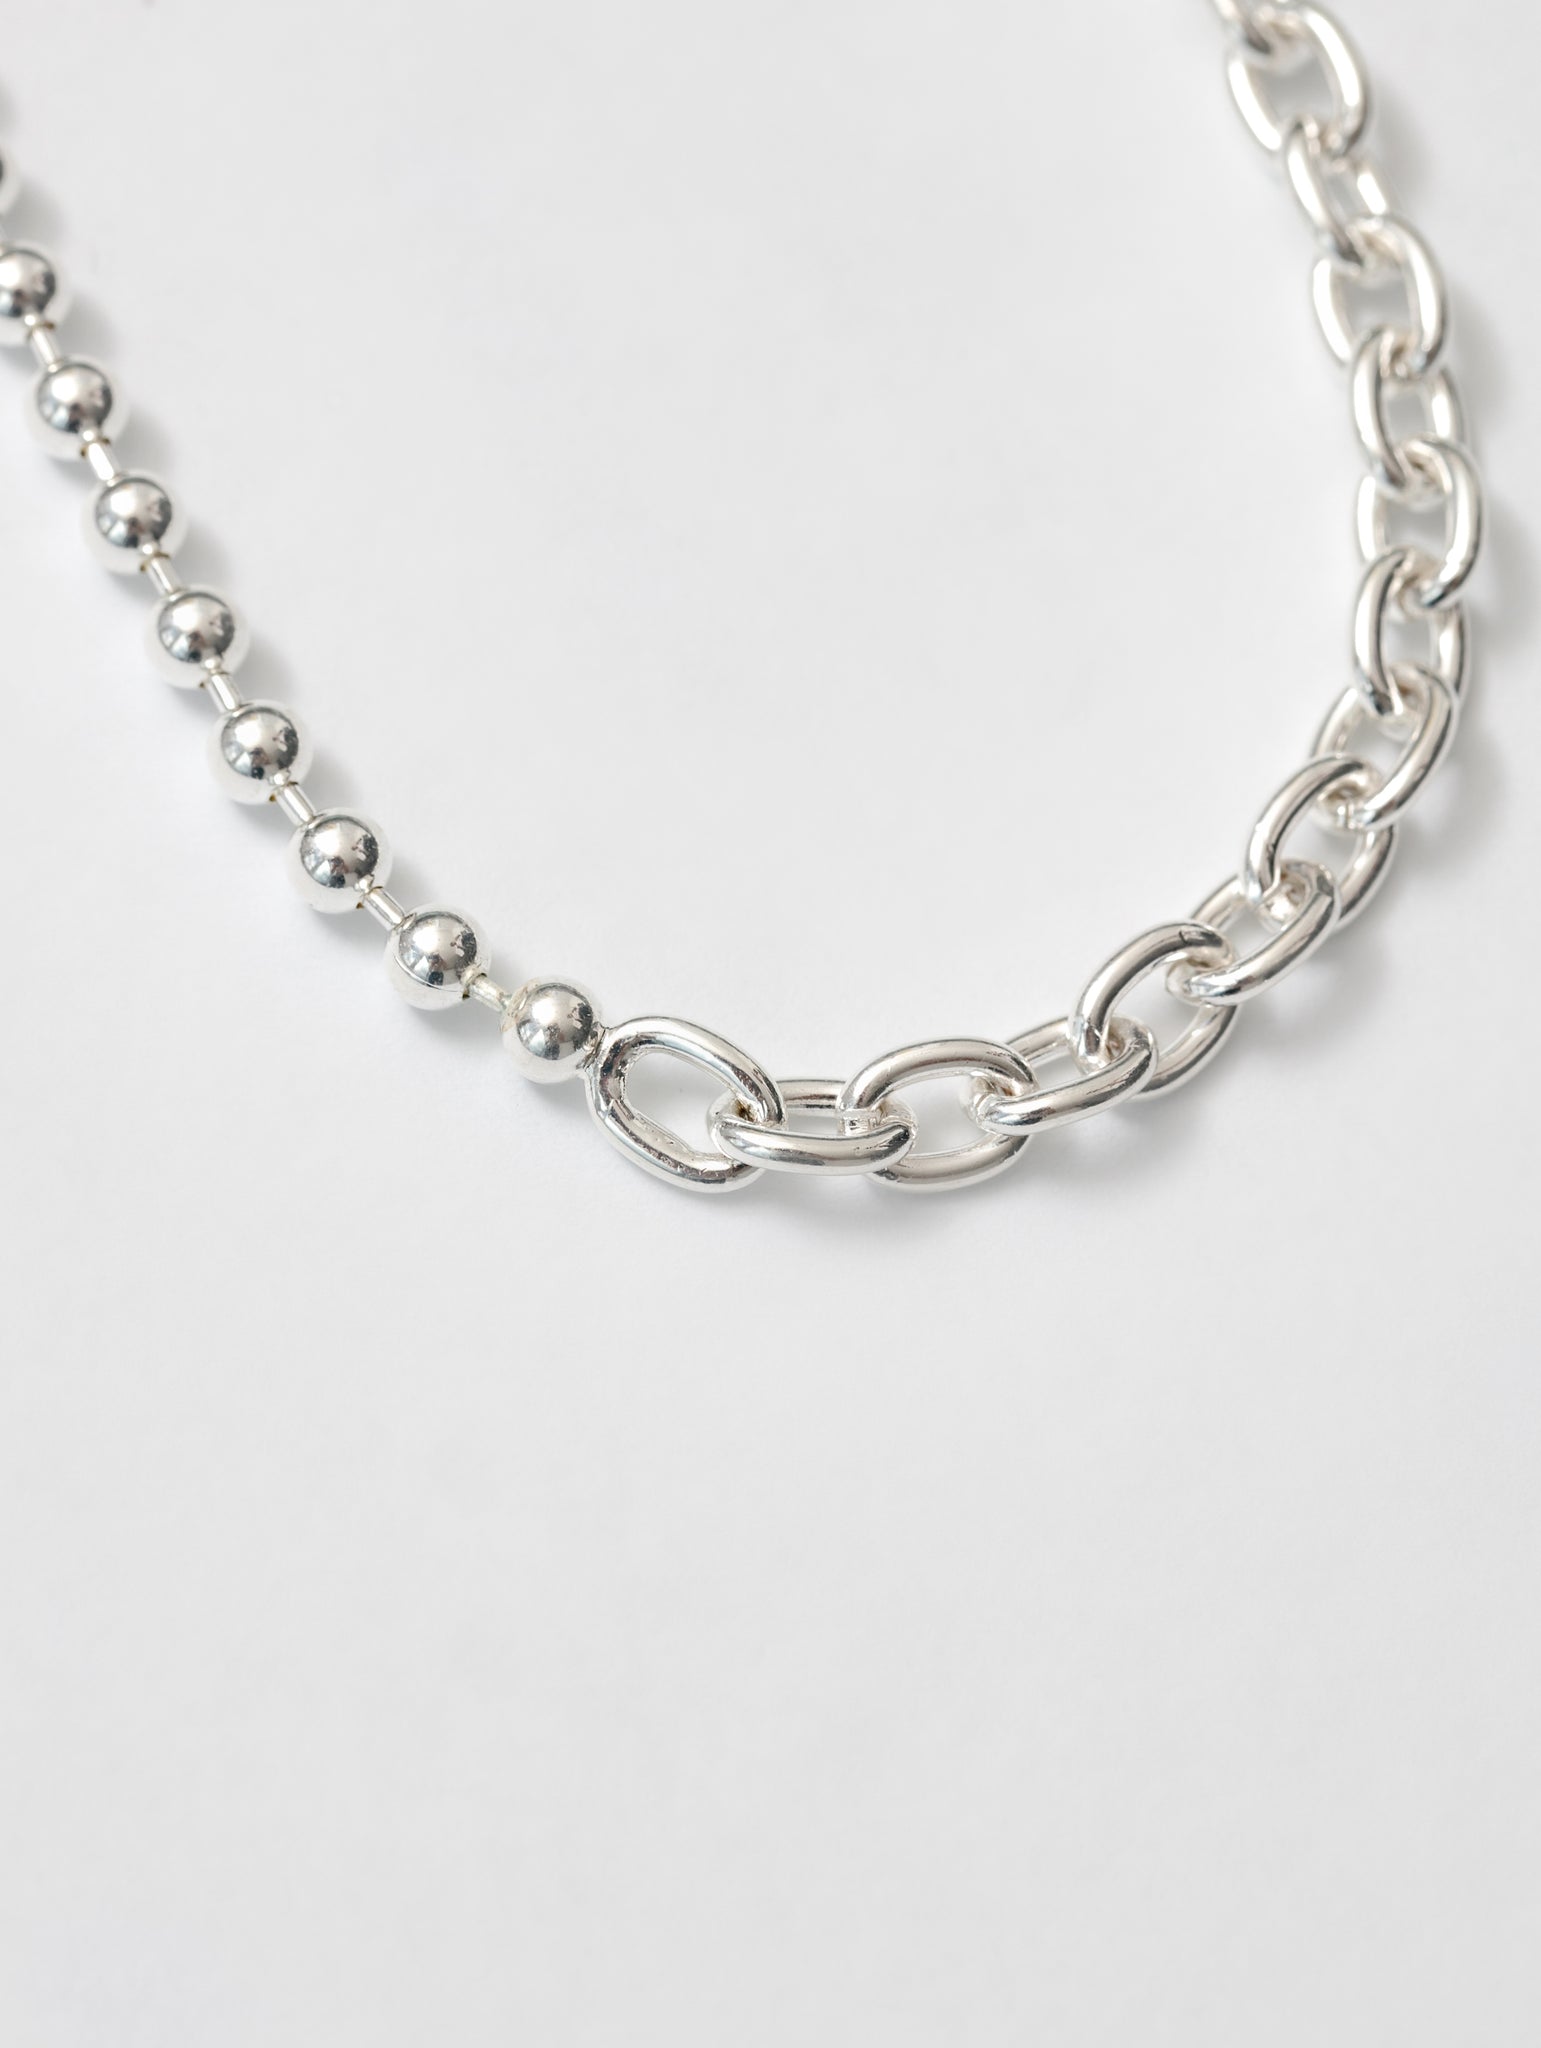 Wolf Circus Statement Unisex Combination Ball Oval Chain Link 925 Sterling Silver Necklace | Noah Necklace in Sterling Silver-Necklaces-wolfcircus.com